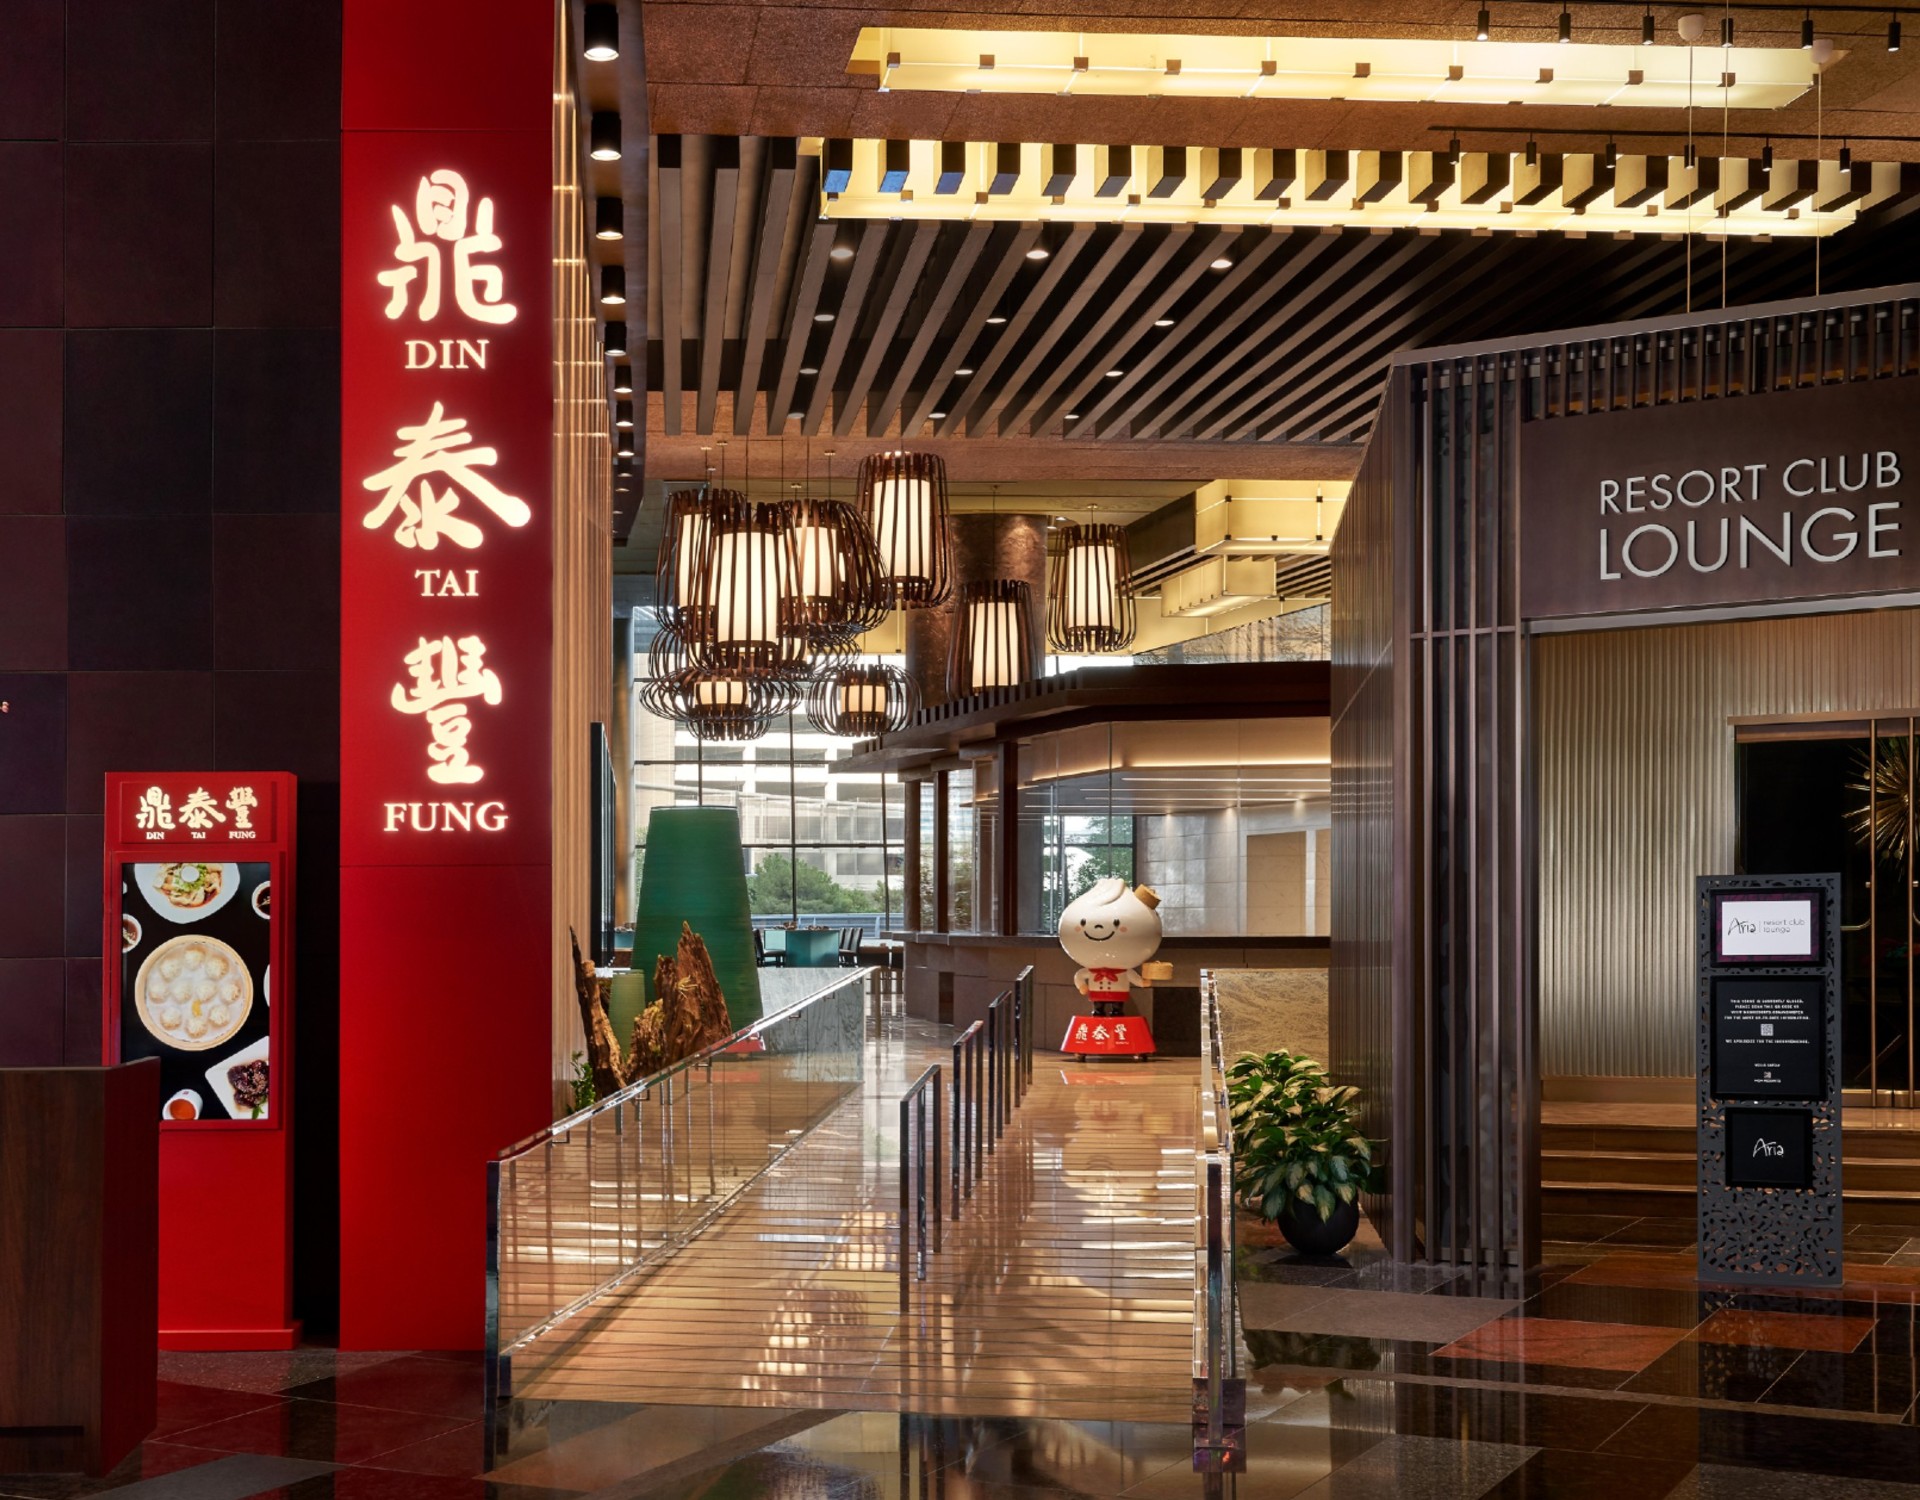 Upon entering the venue, guests will be greeted by Din Tai Fung’s signature show kitchen where the culinary team will create 10,000 dumplings each day.